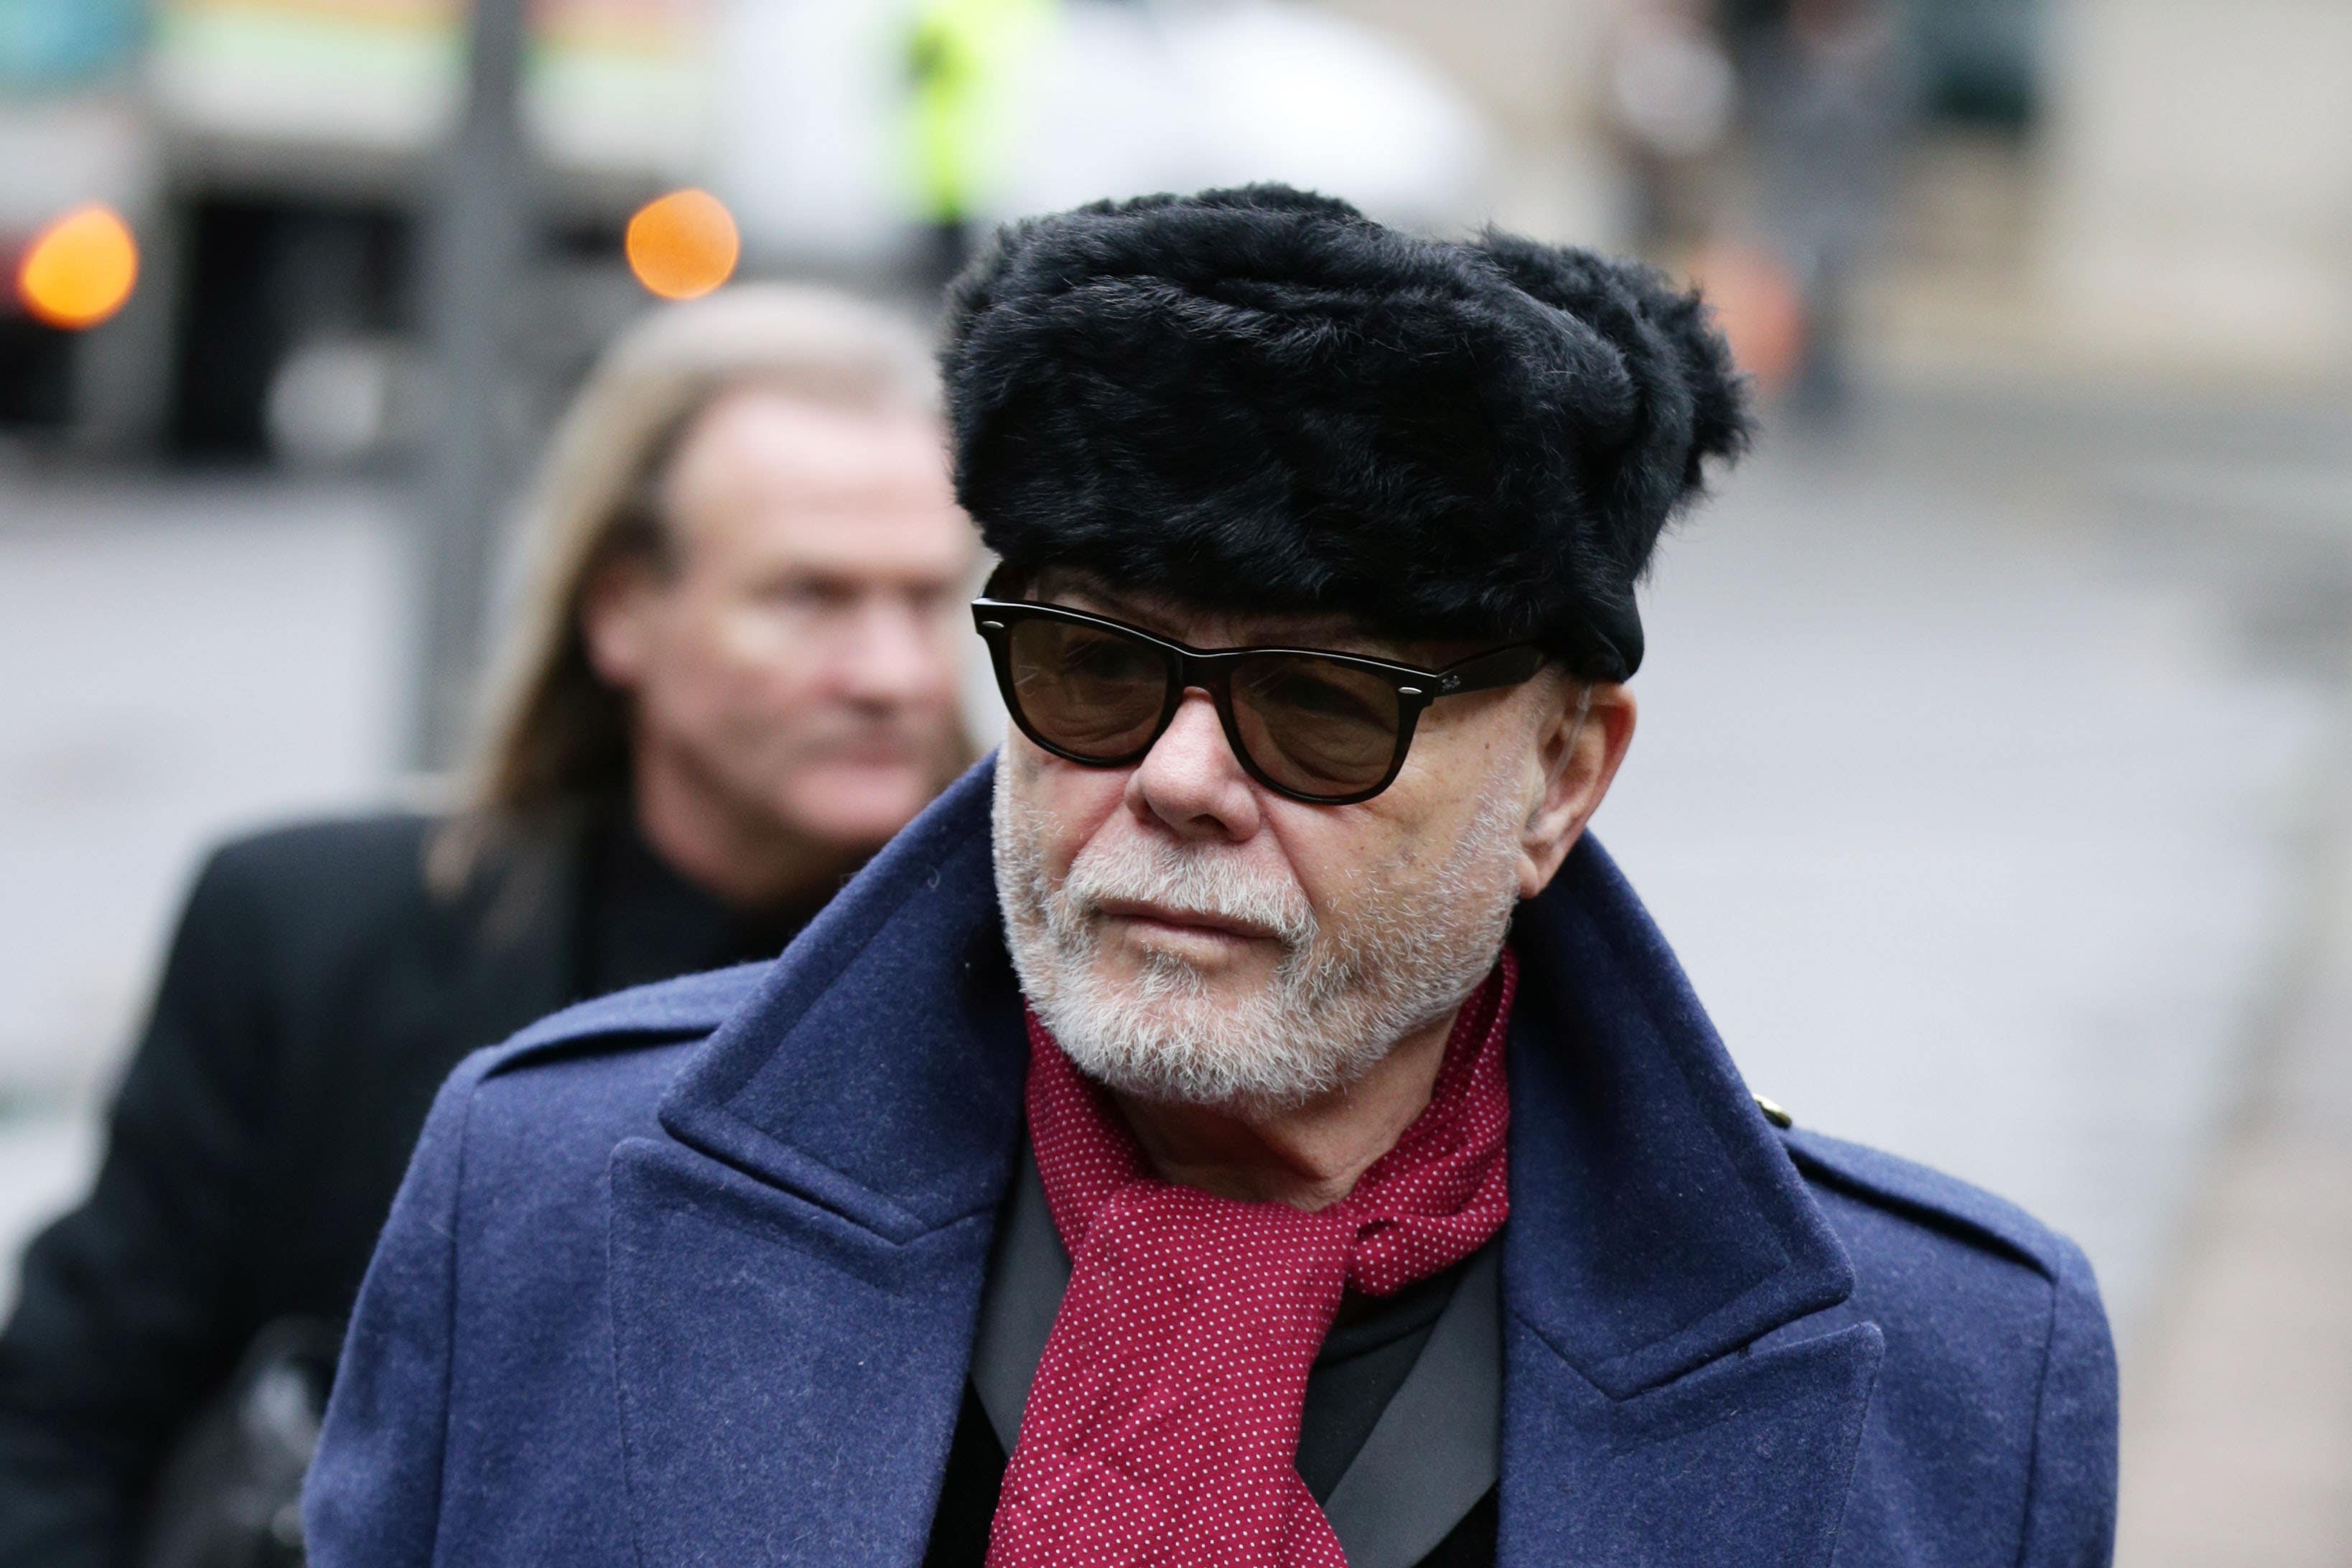 Paedophile Gary Glitter Freed From Jail After Serving Half Of 16 Year Sentence